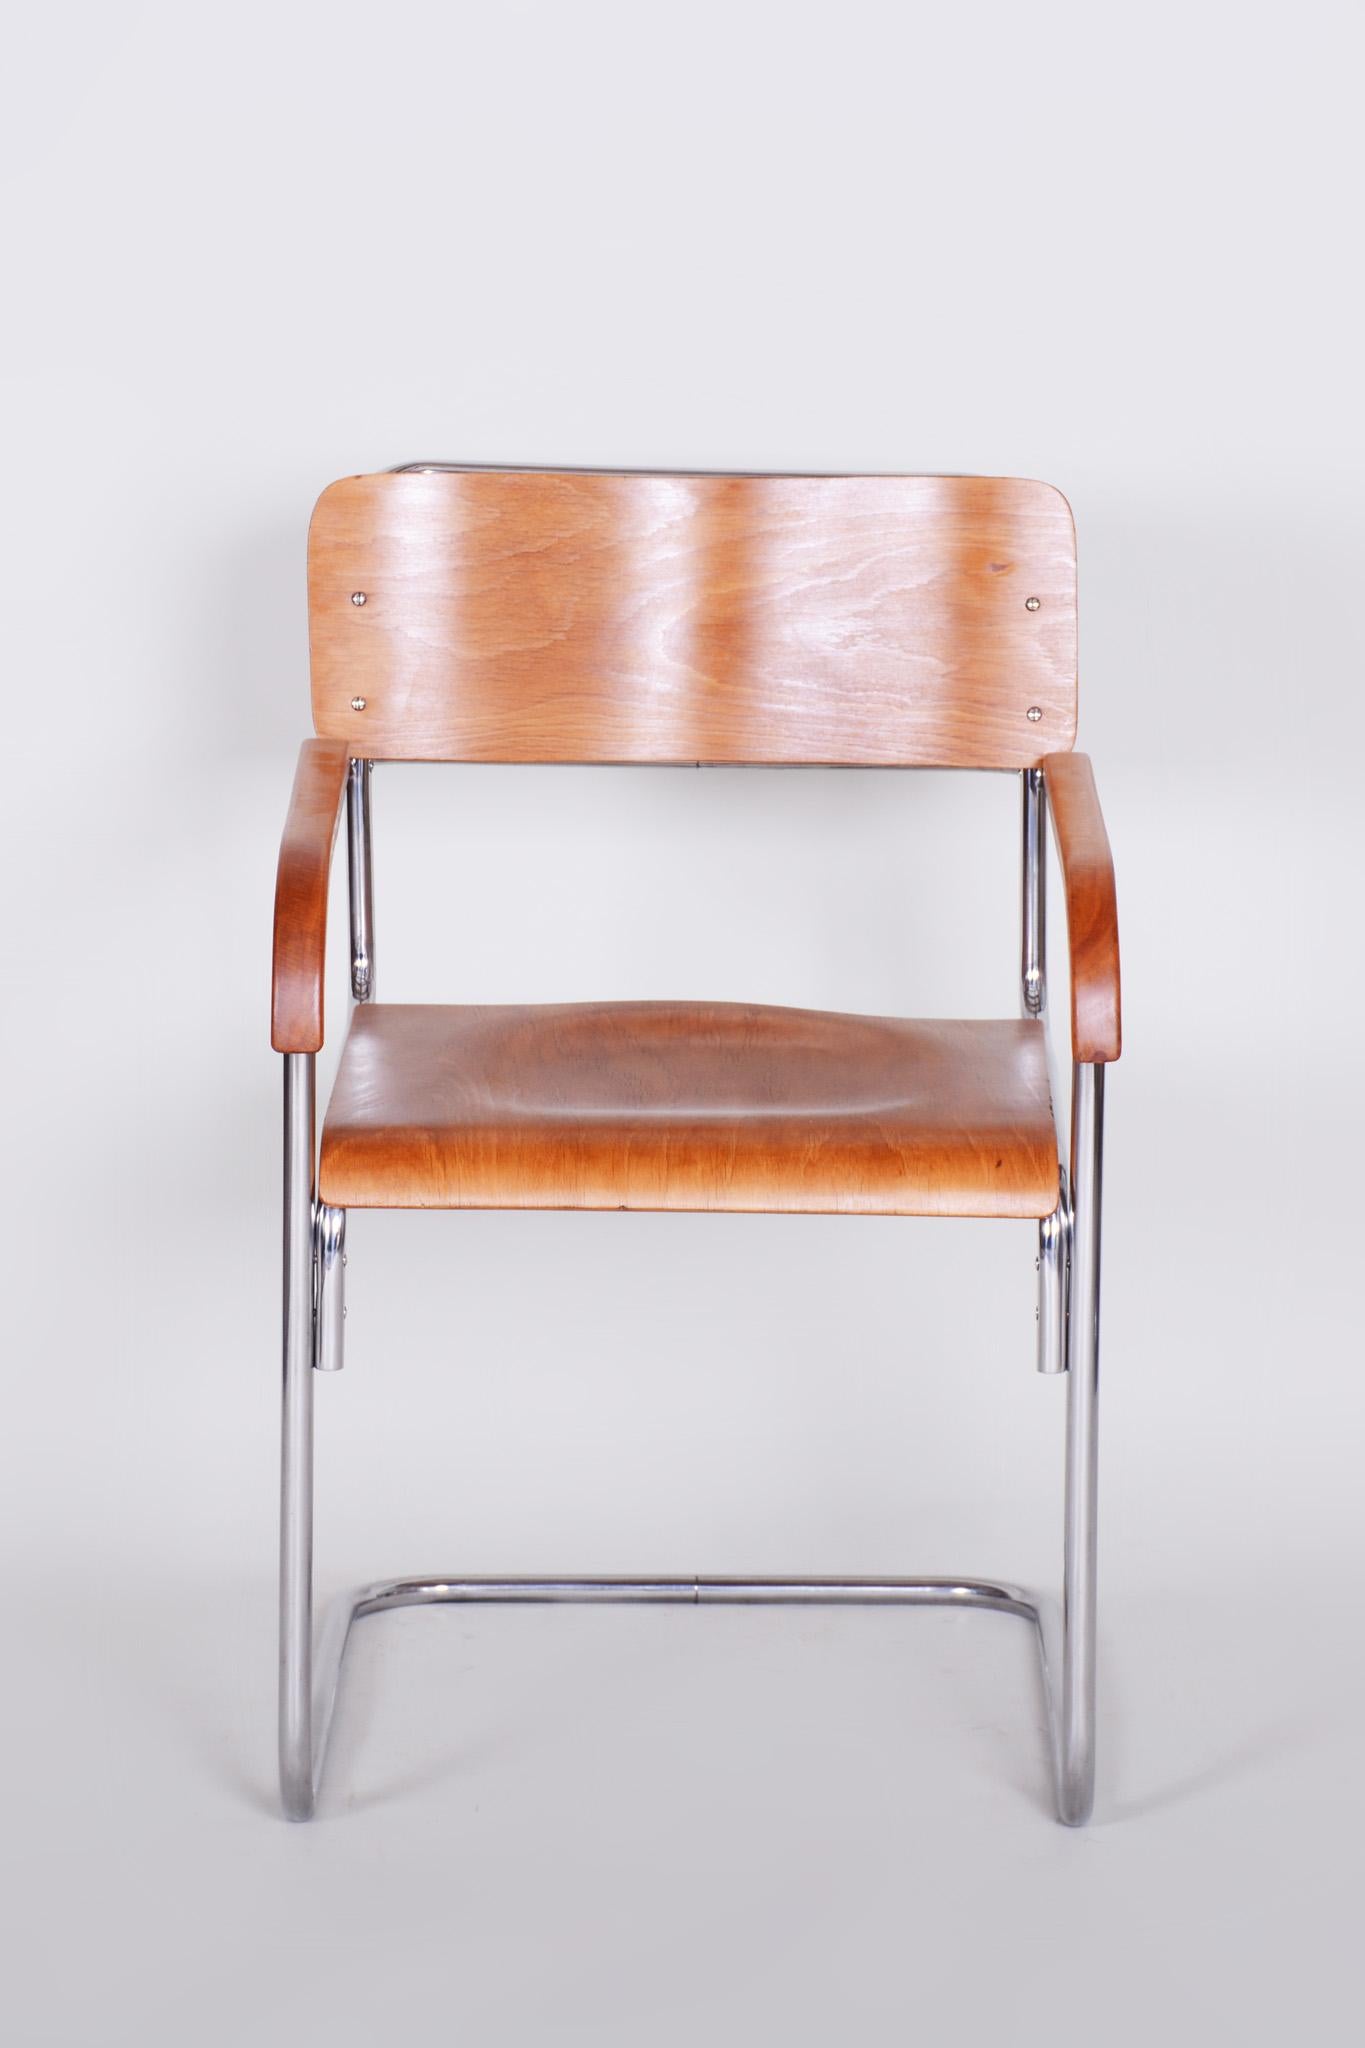 Armchair by Mücke and Melder
Style: Bauhaus.
Period: 1930-1939. 
Material: Beech and chrome 
Source: Czechia.





 